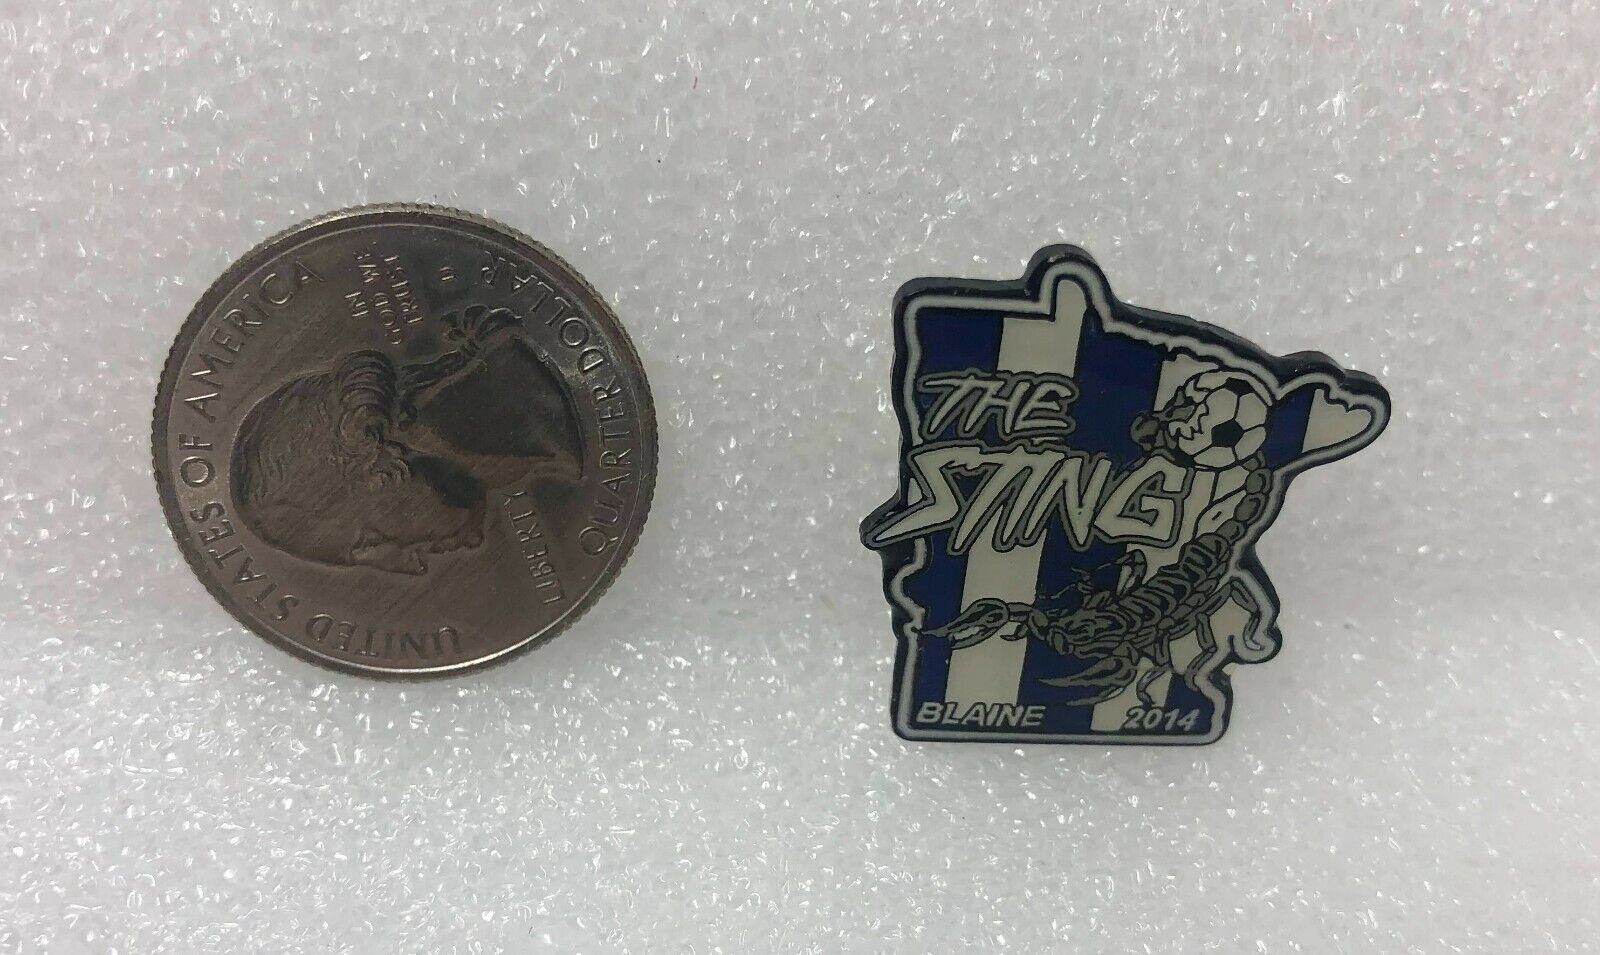 2014 The Sting Blaine Soccer Pin